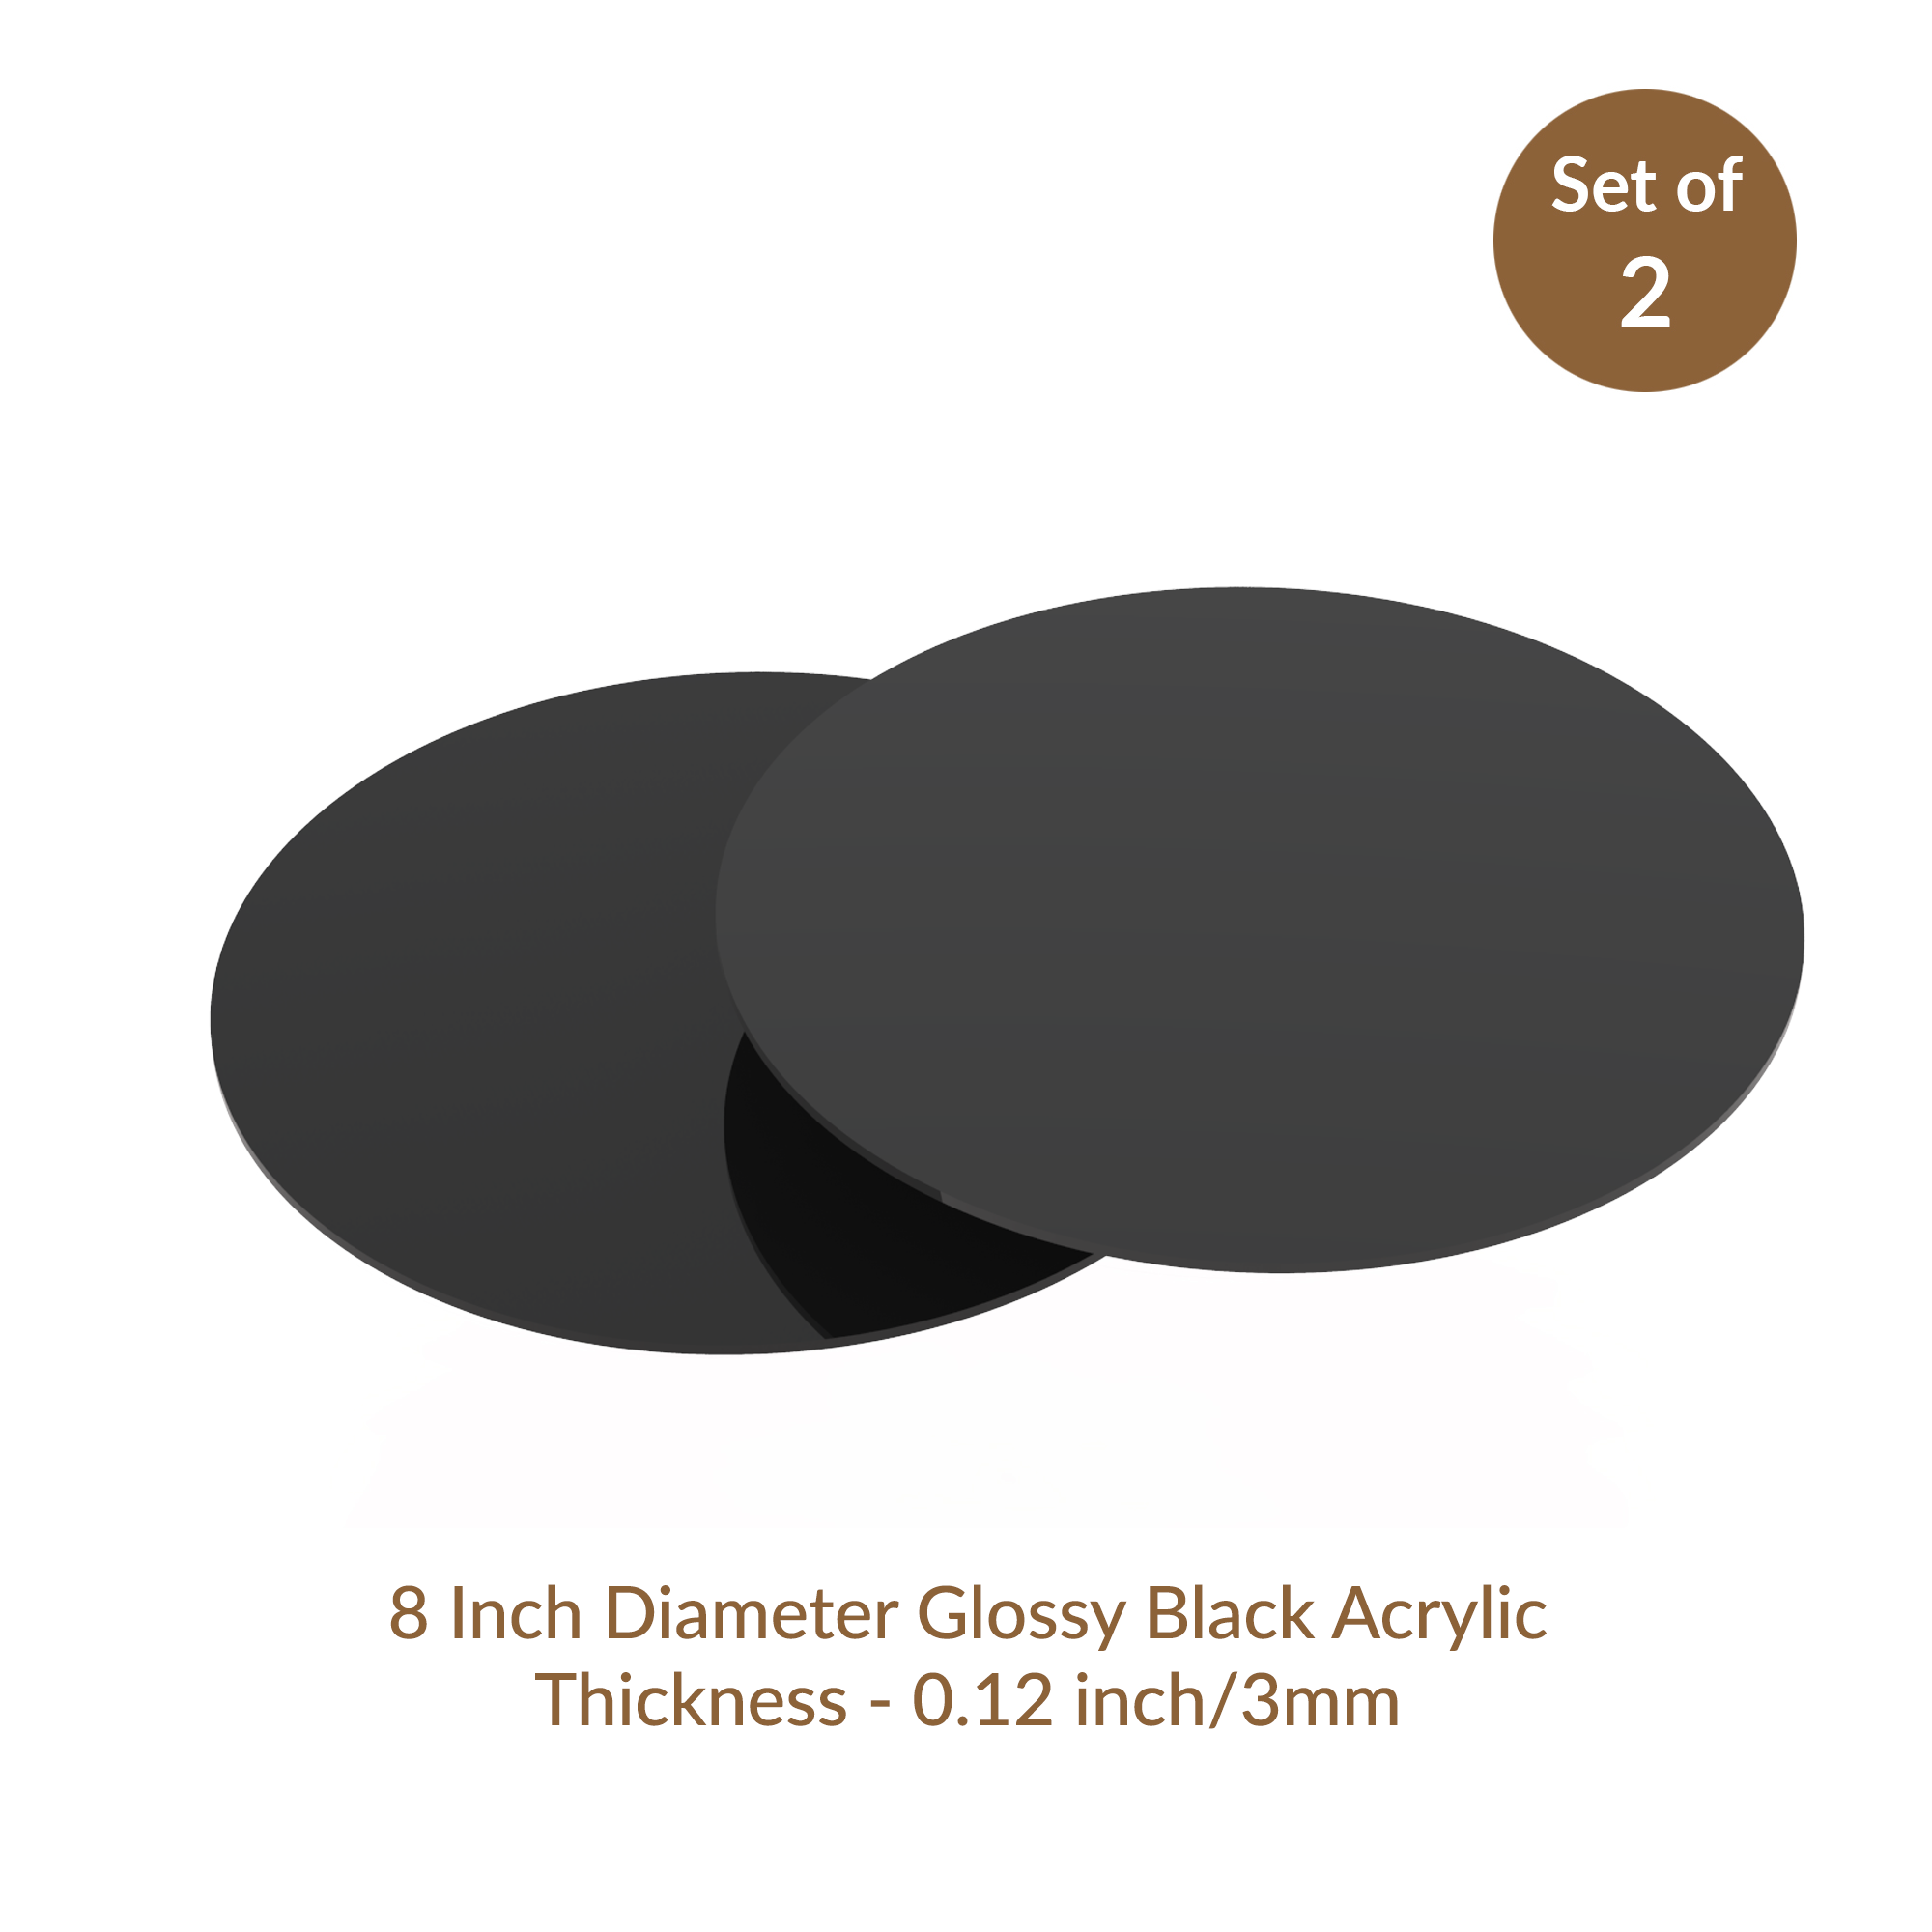  Lacupella Reusable Cake Board Glossy Acrylic Round Disk Set of  2-1/8 or 0.12 inch Thickness for Cake Serving and Presentation Replacing  Corrugated Board (8 inch Diameter Black) : Home & Kitchen